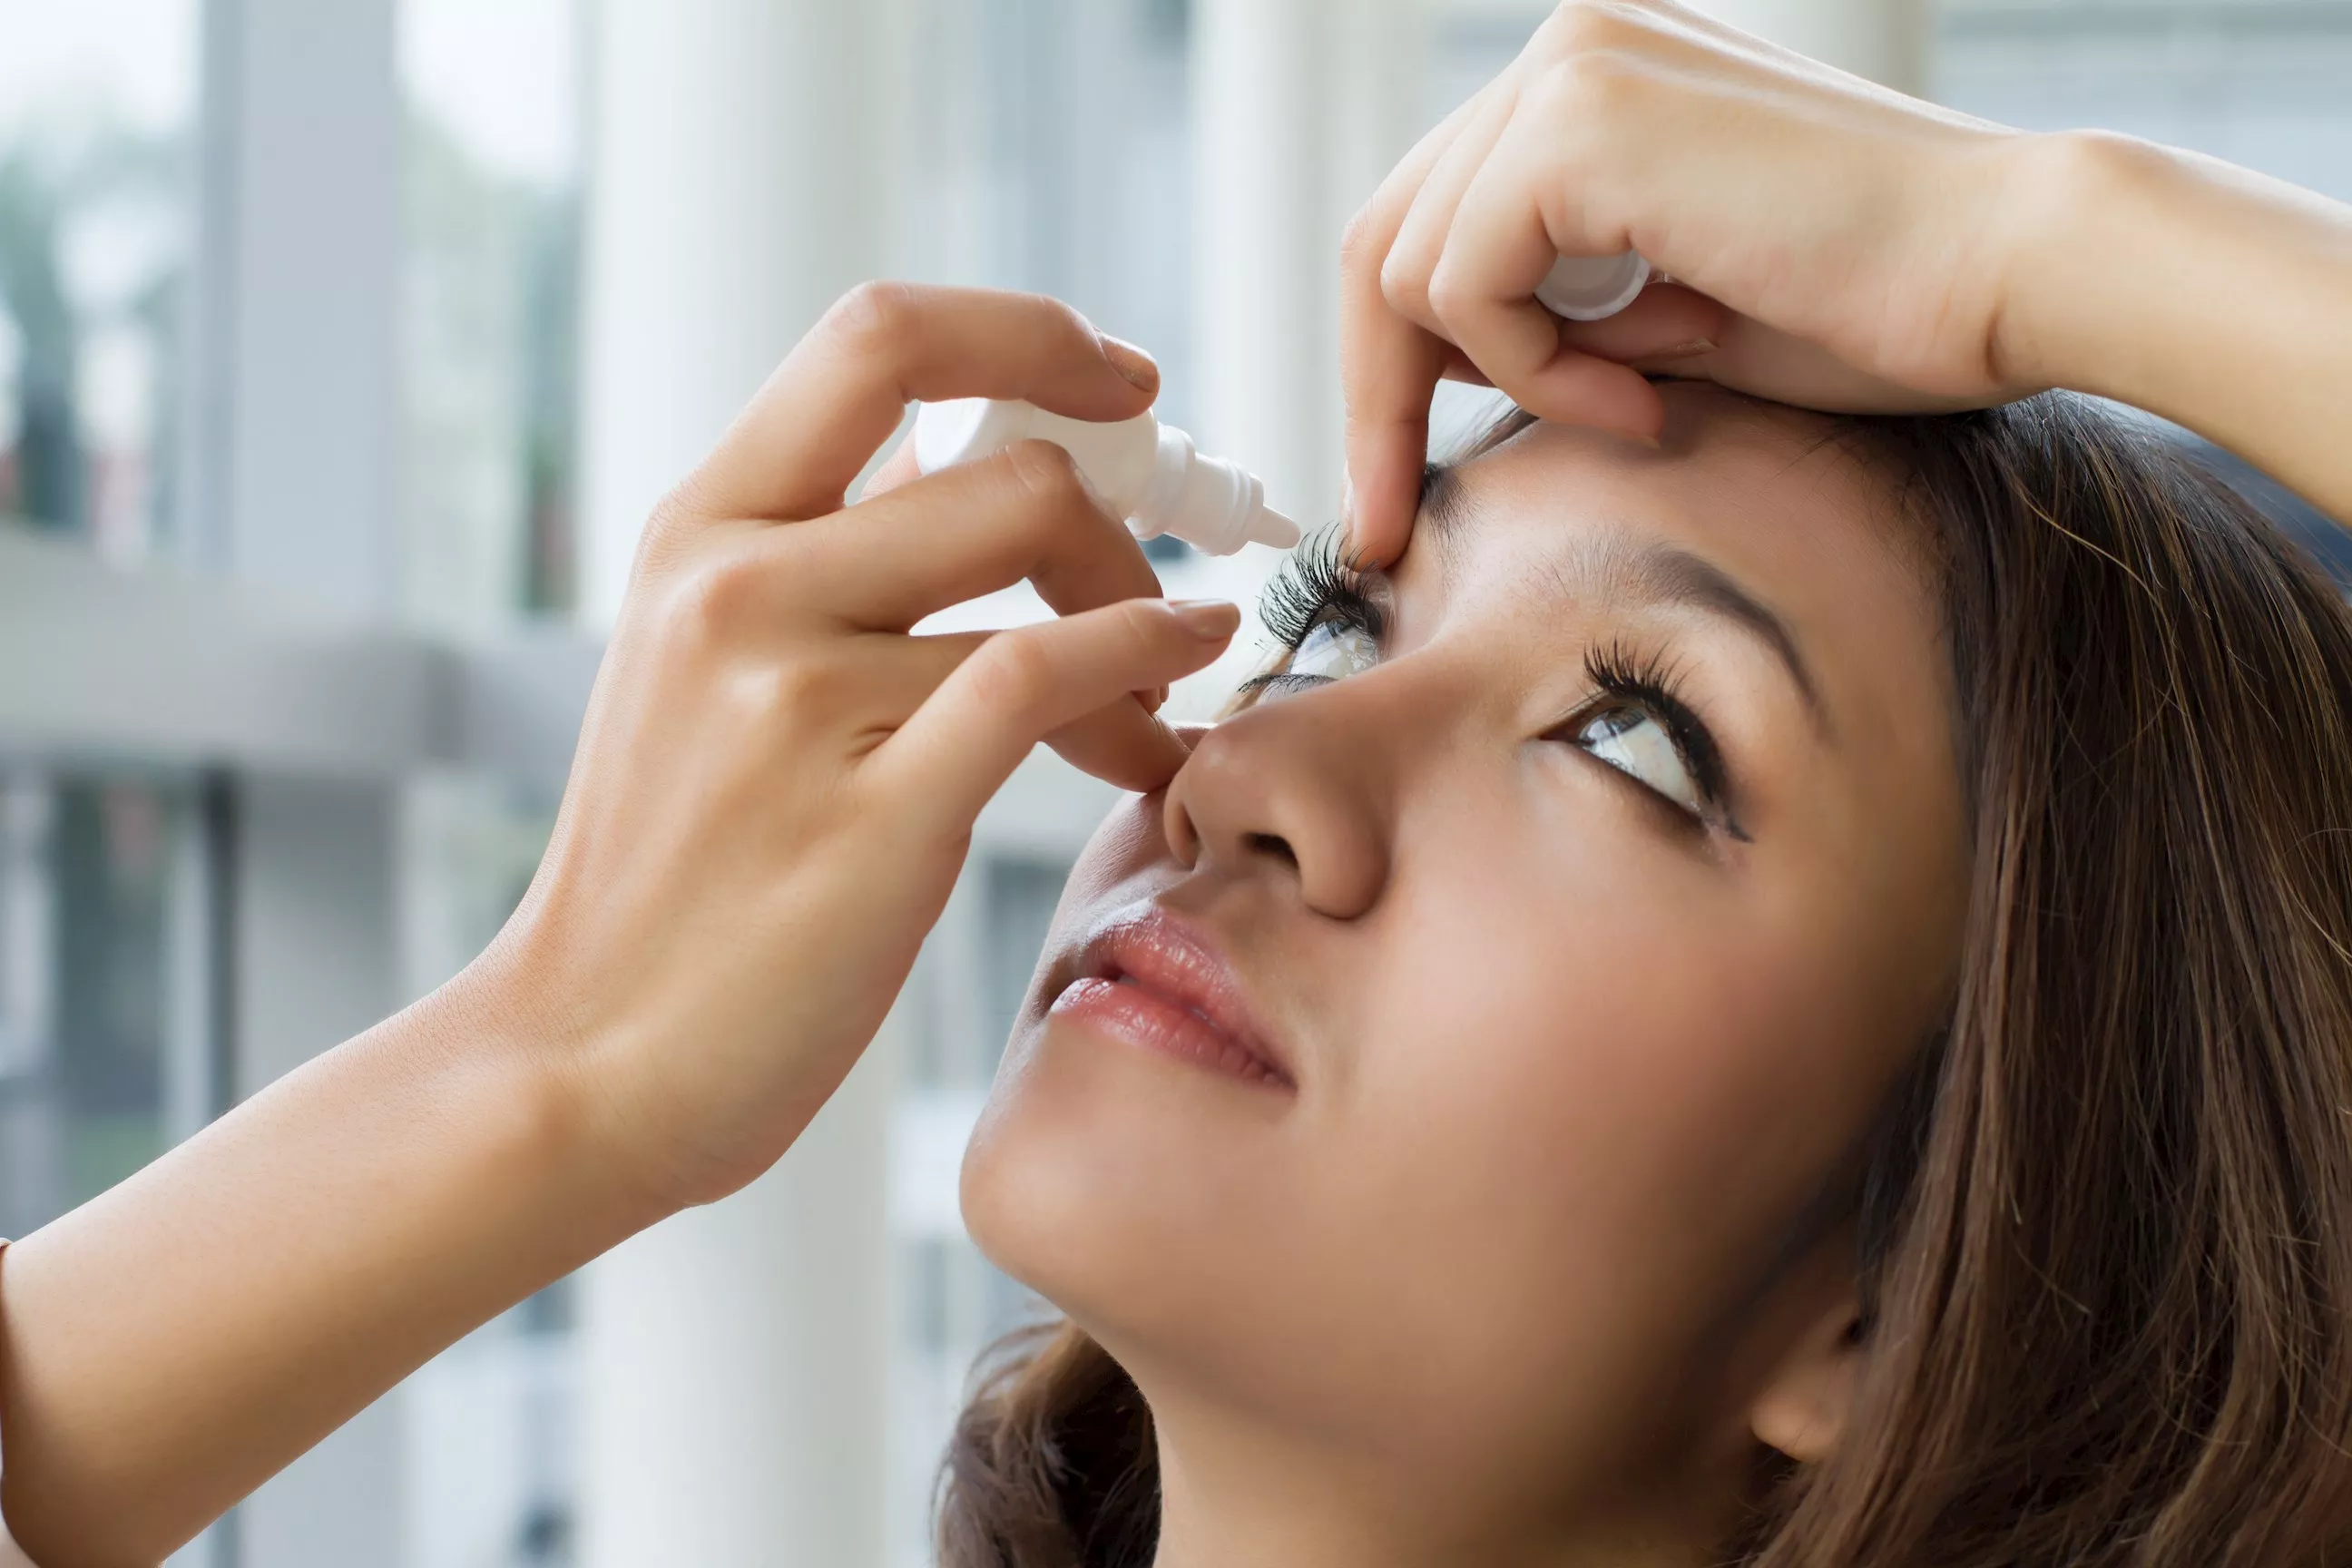 How Does Dry Eye Occur? How does it heal?